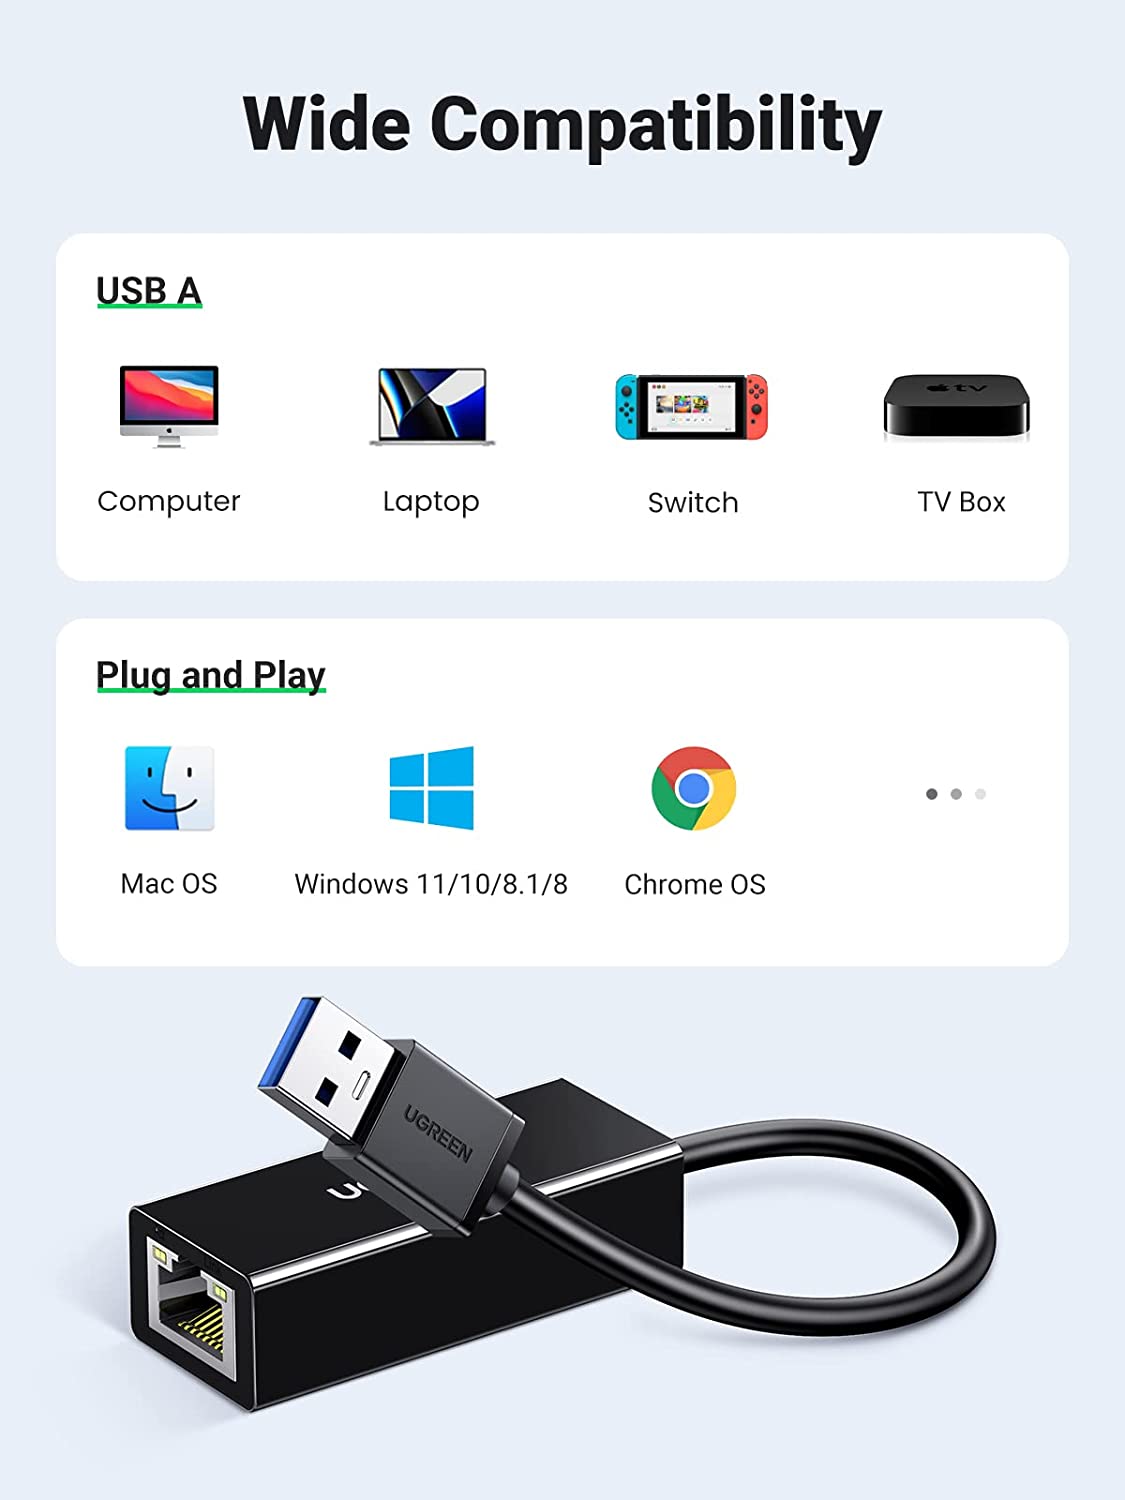 USB 3.0 to RJ45 Ethernet Adapter 4 in 1 Multiport USB Hub with Gigabit  Ethernet 1000Mbps RJ45 LAN Network Adapter Compatible and 3-Port USB3.0  Support Laptop PC Windows Linux MacOS, and More 